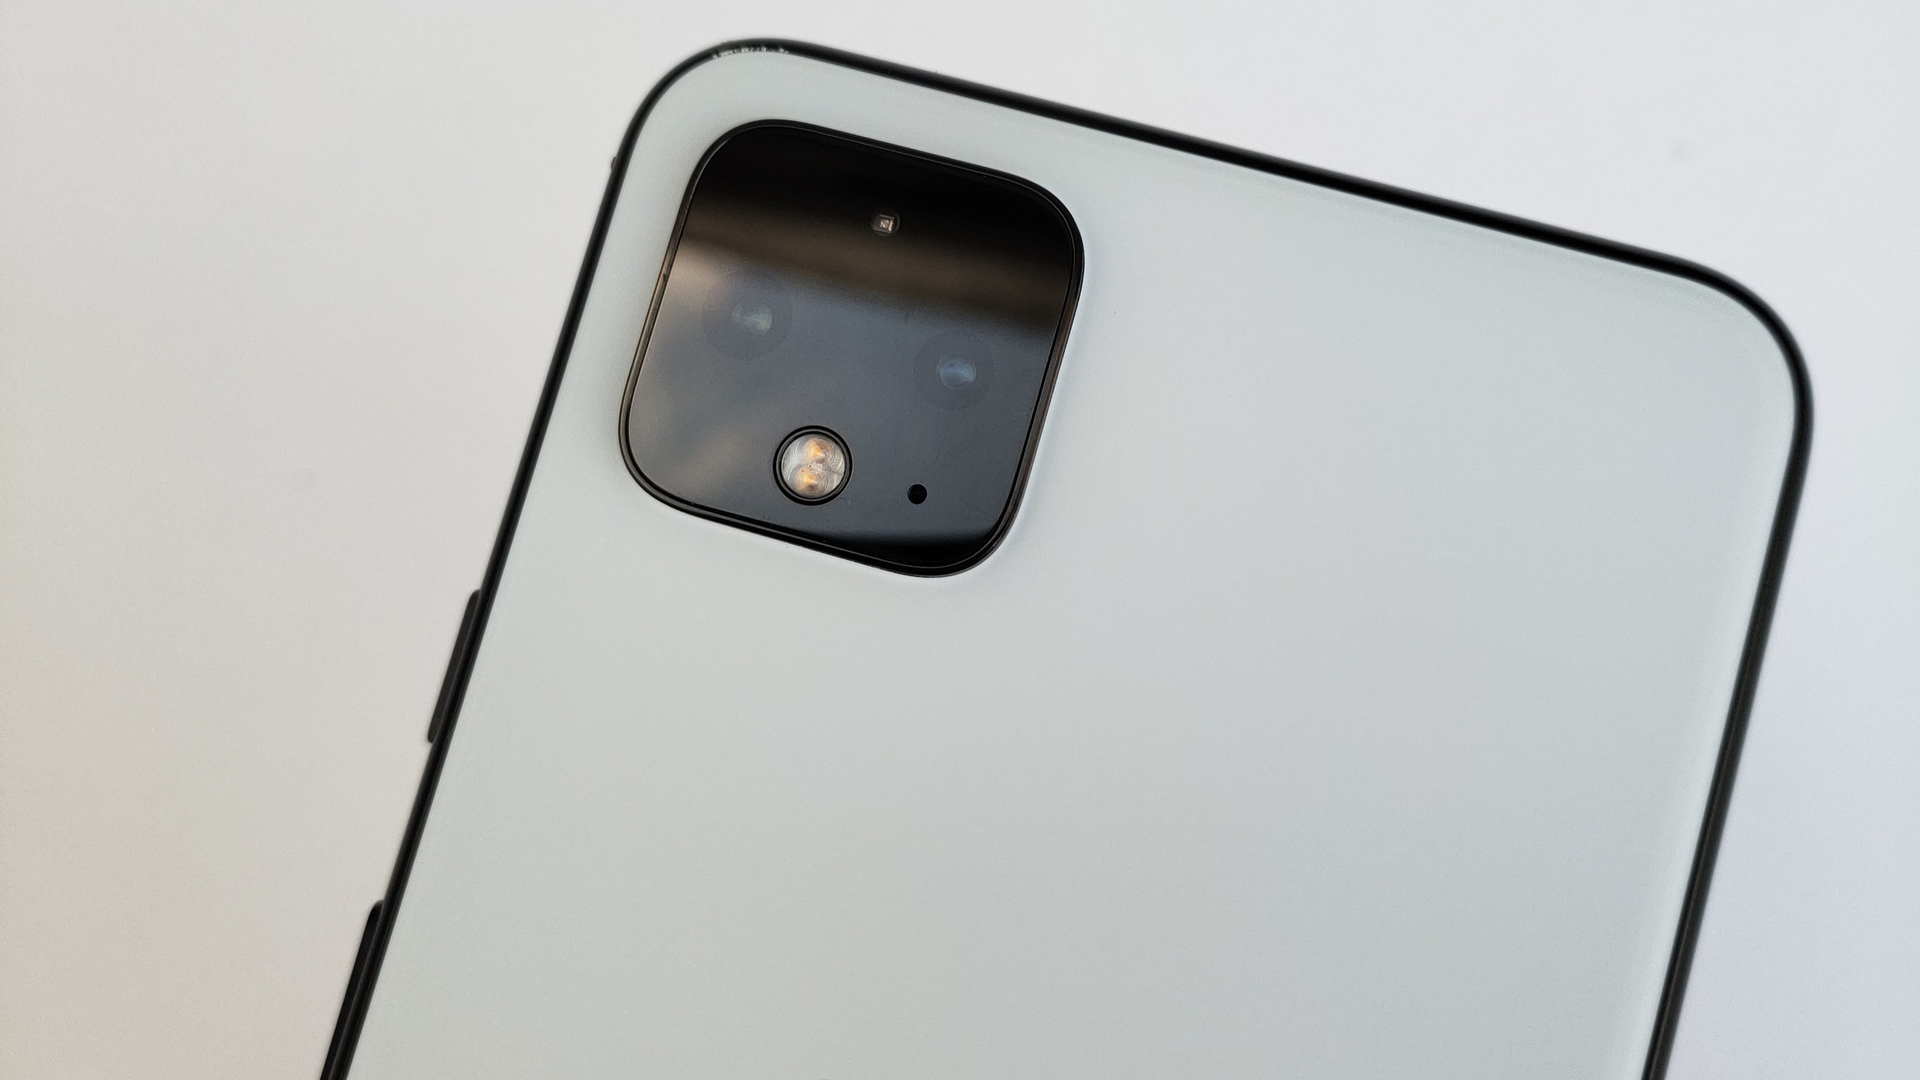 Download Pixel 4 wallpapers, updated Pixel Launcher, and more